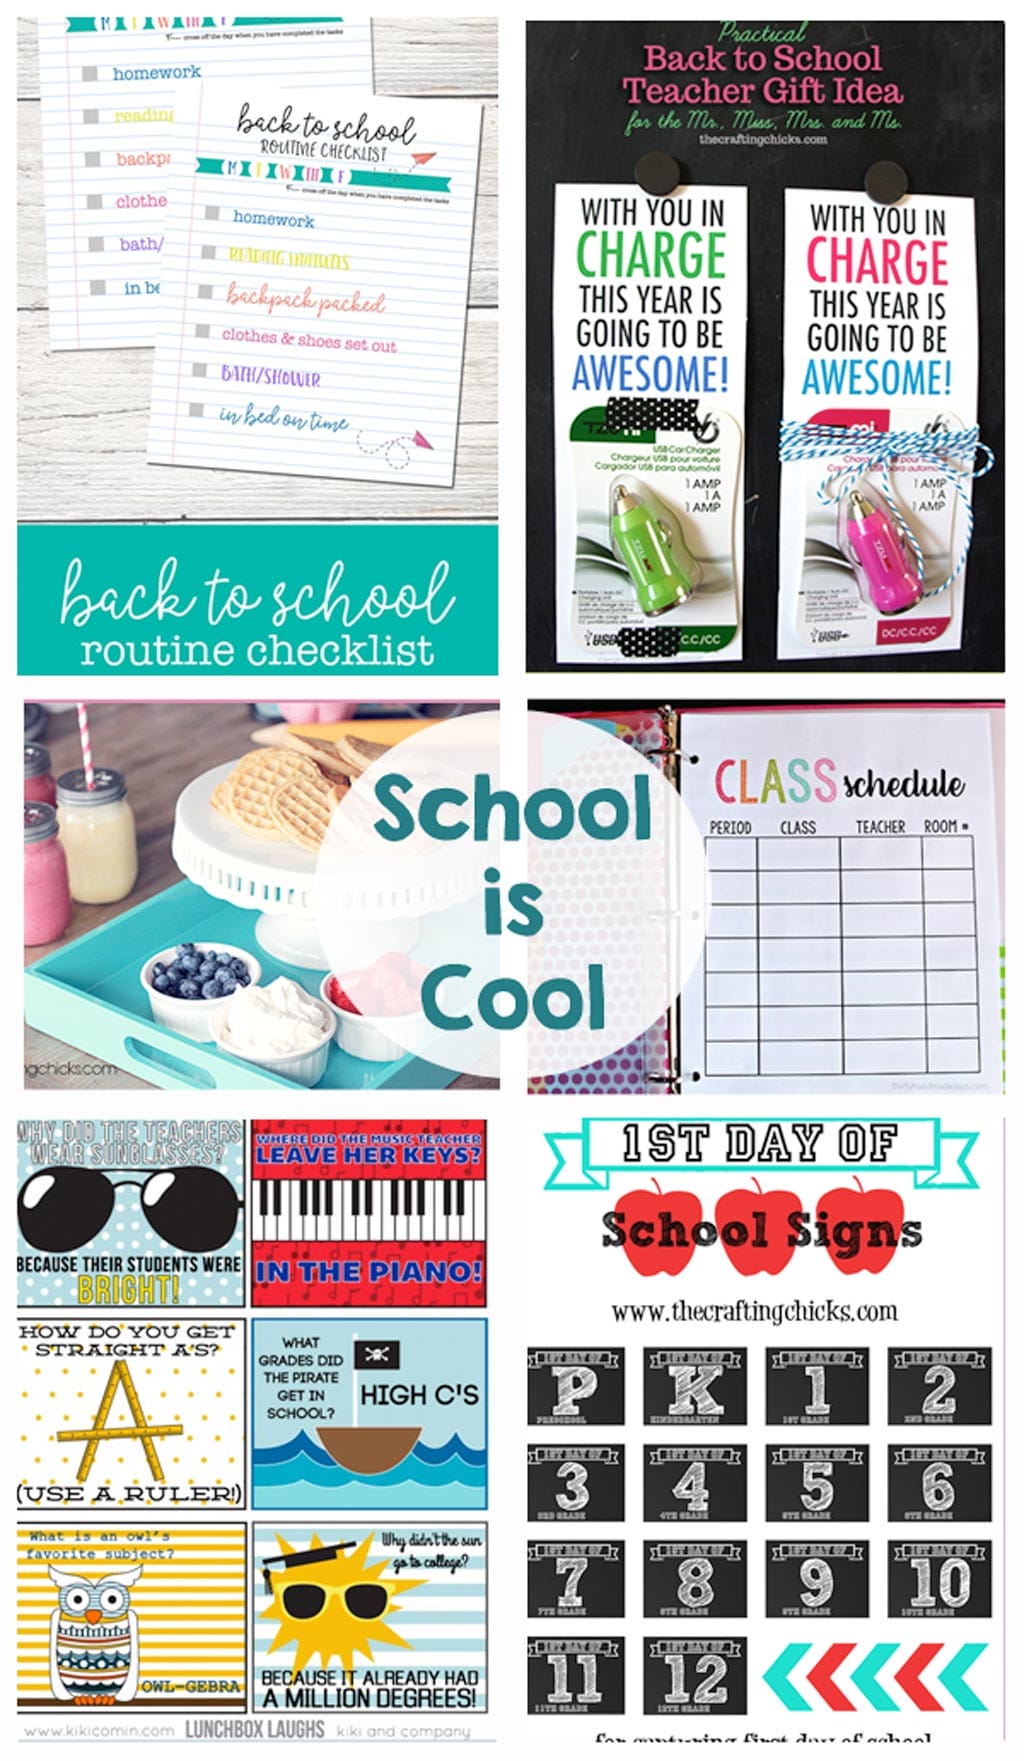 School is Cool - The Crafting Chicks